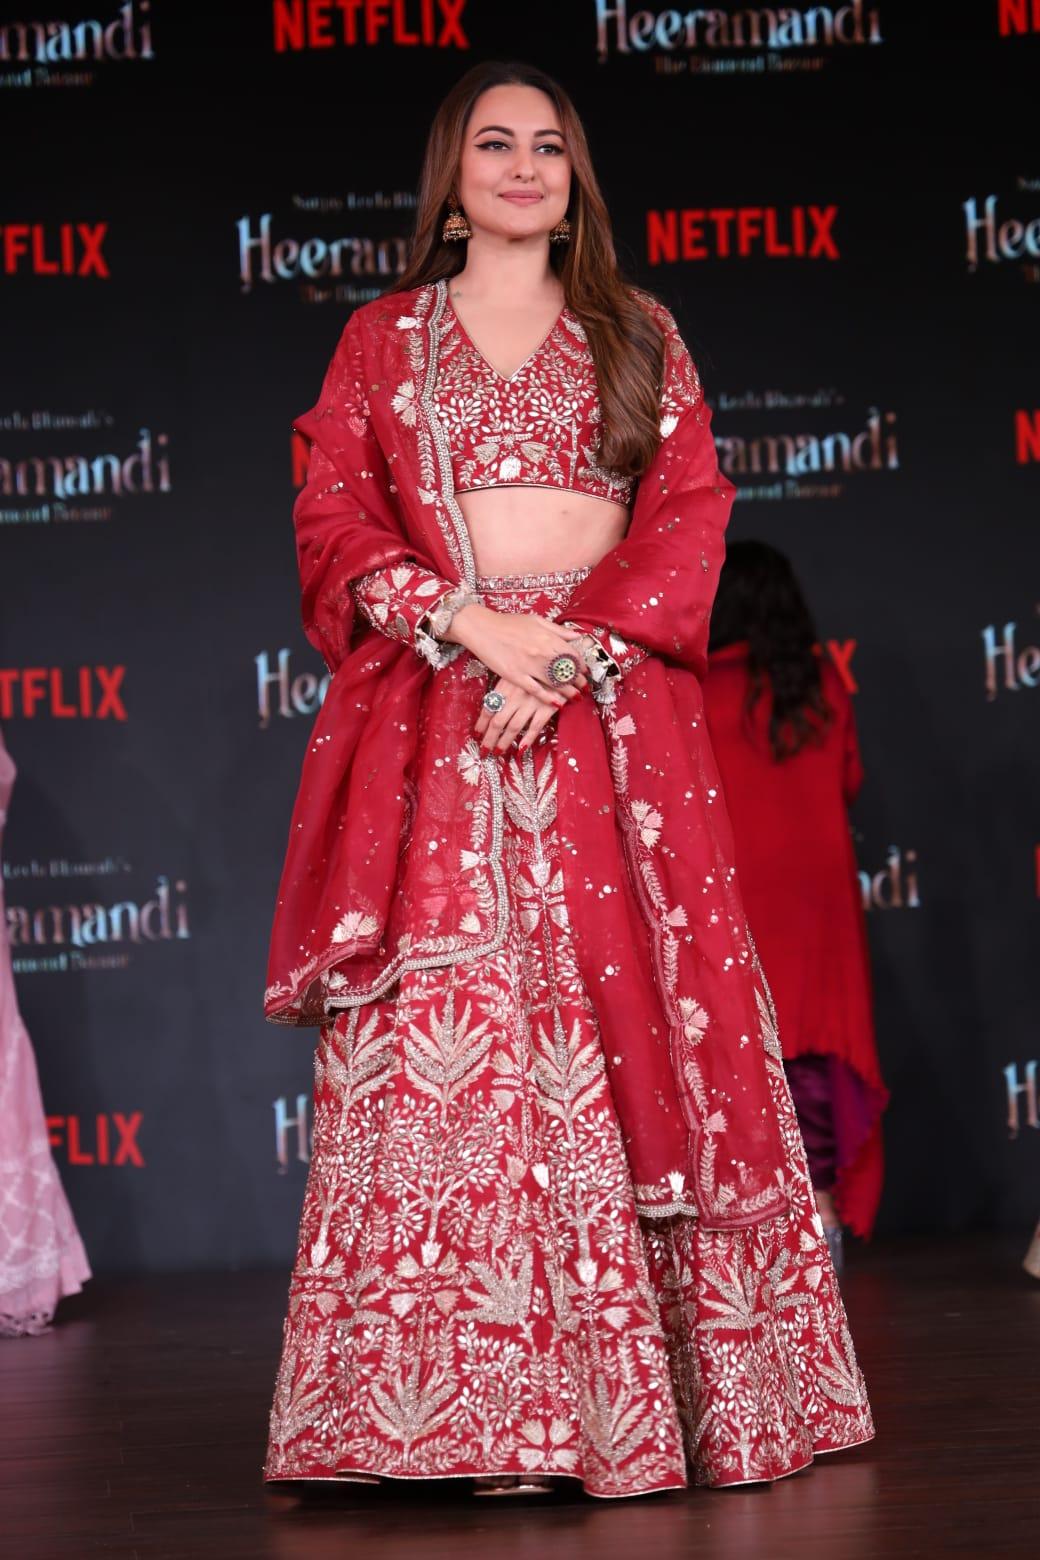 Sonakshi Sinha, who will be seen in a shady grey character in the series, was seen wearing a red embroidered lehenga at the event